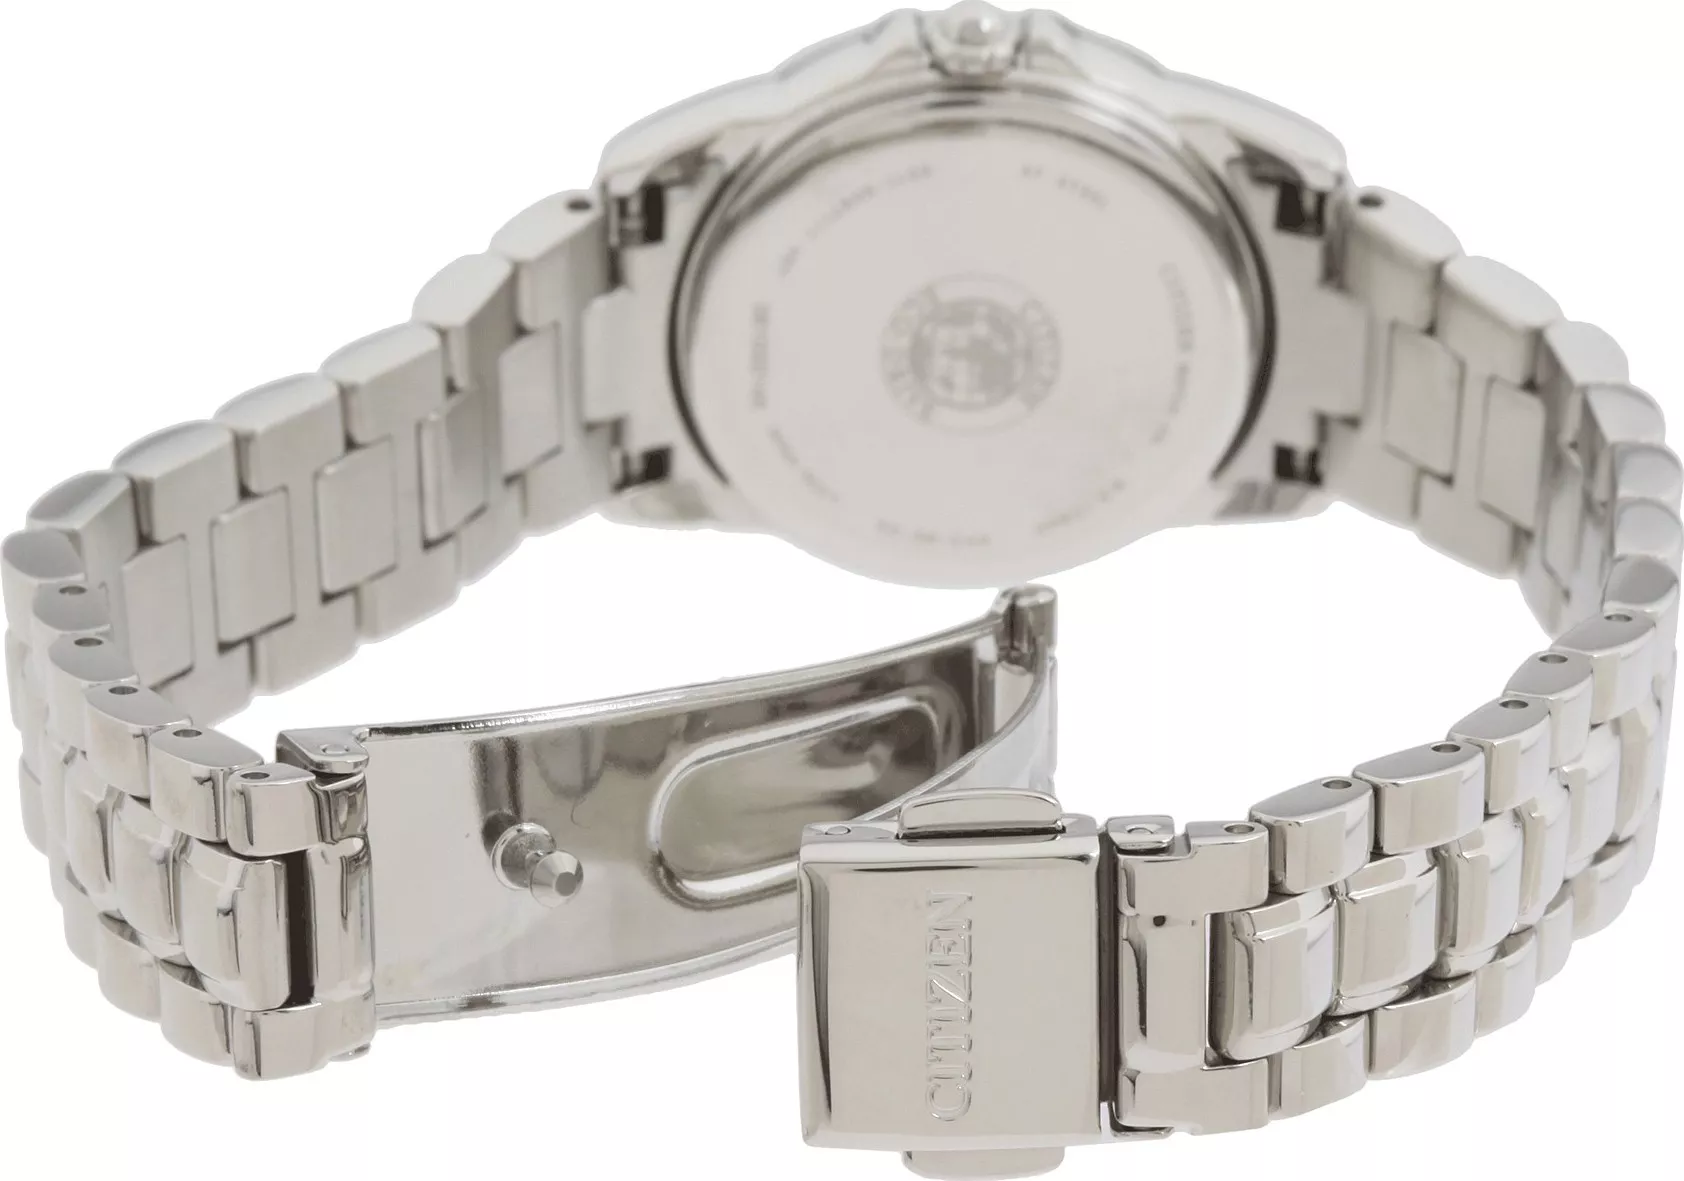  Citizen Silhouette  Women's Eco Drive Stainless Watch 26mm